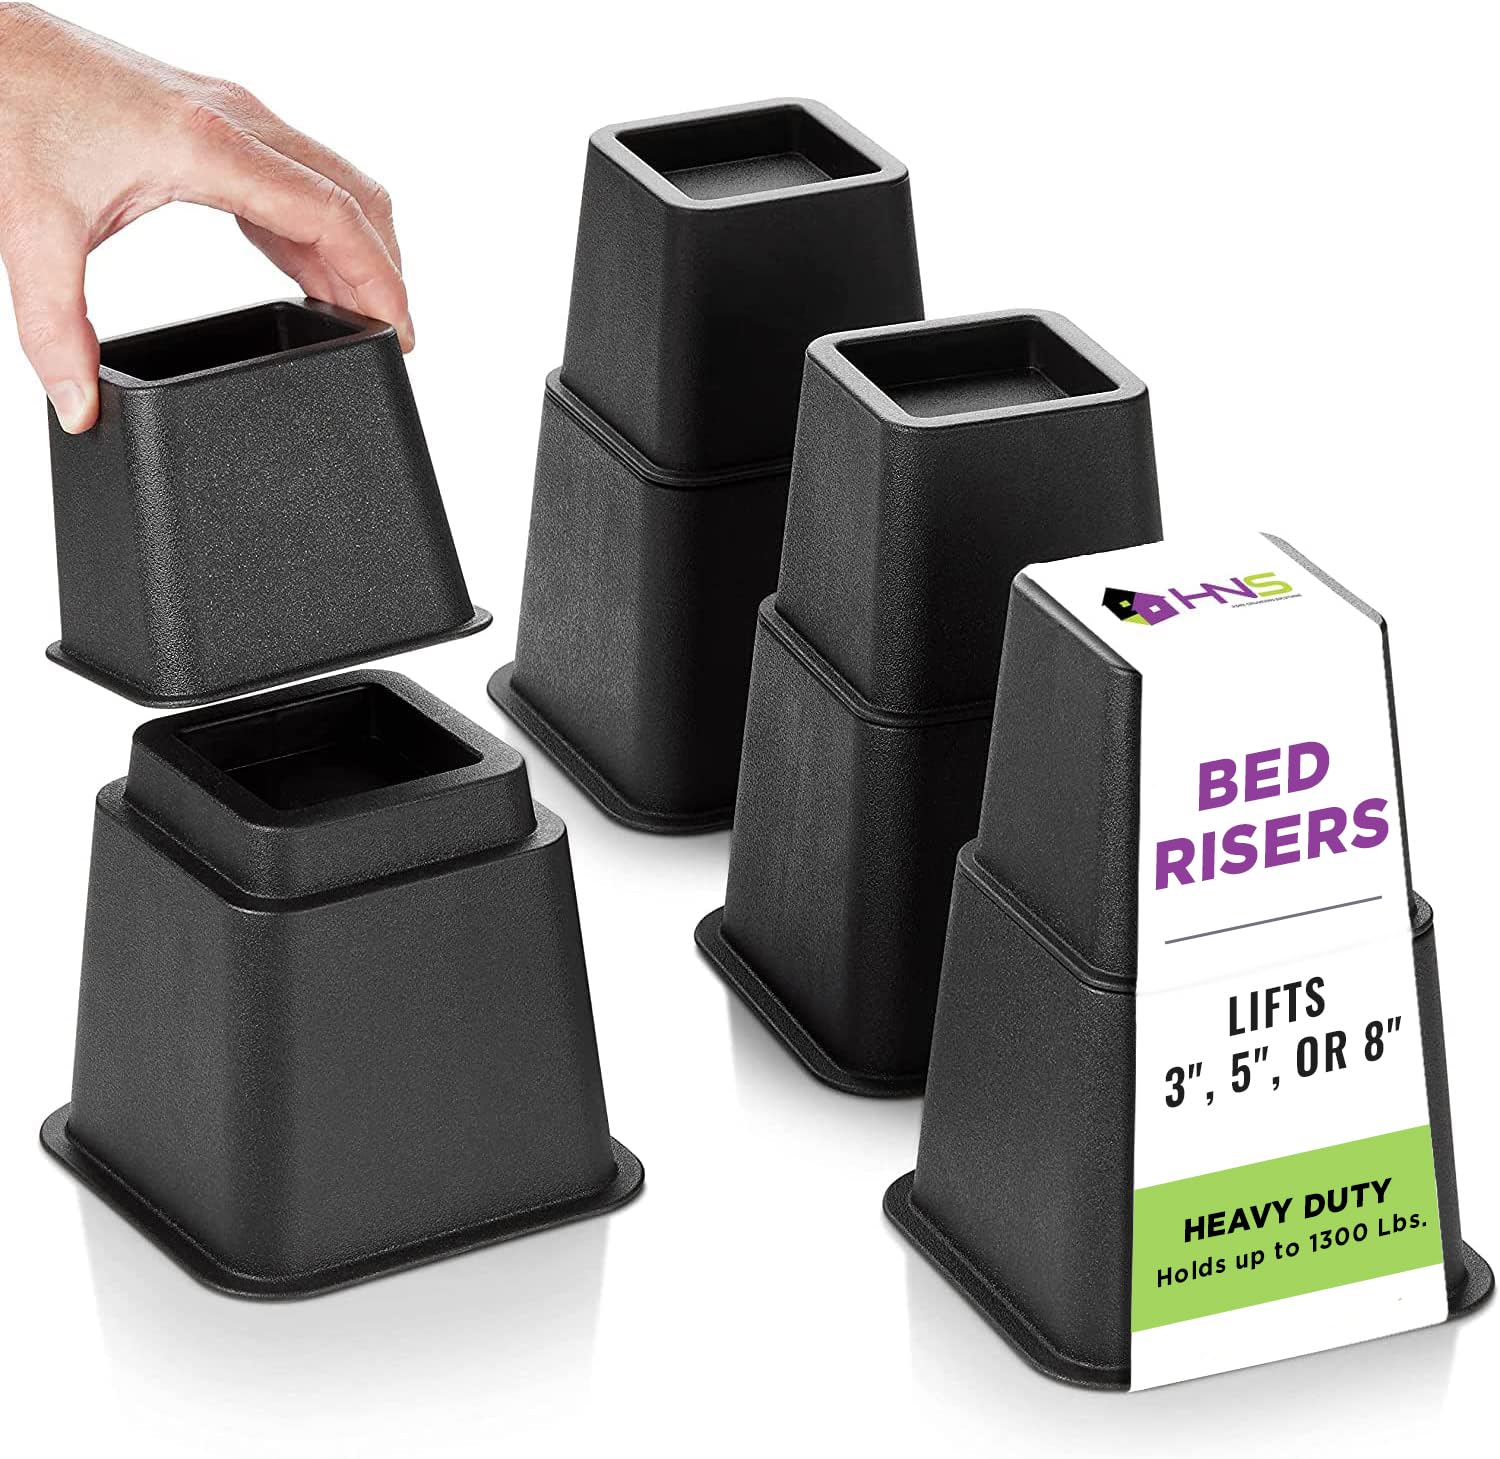 Adjustable Bed Risers and Furniture Risers - Stackable Bed Lift 3, 5, or 8 Inch - Set of 4 Bed Risers 8 inch Heavy Duty - Perfect for College Dorms- Supports up to 1,300 lbs � Fits legs up to 7.5� W  - Very Good